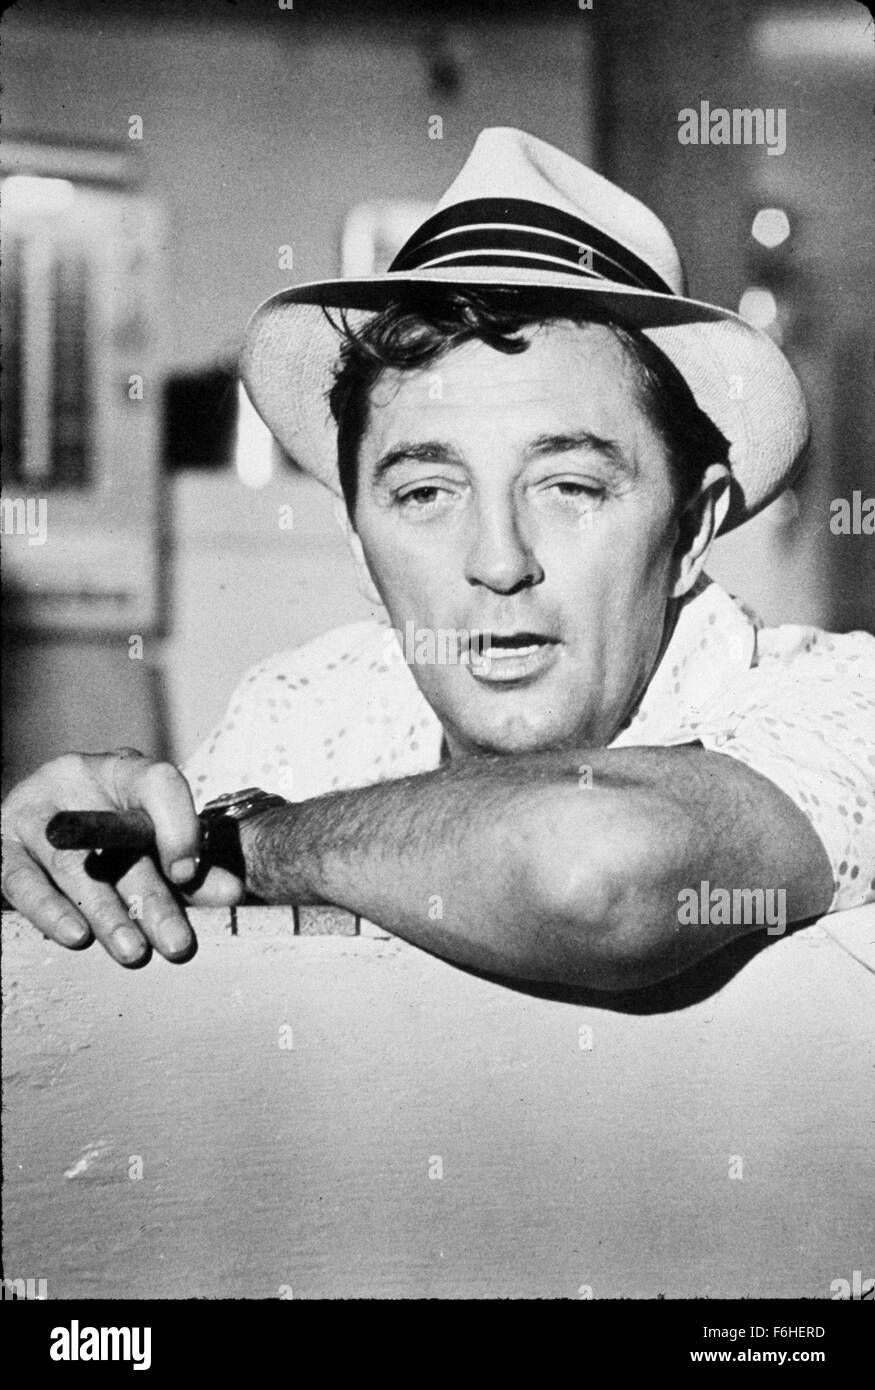 1962, Film Title: CAPE FEAR, Director: J LEE THOMPSON, Studio: UNIV,  Pictured: ROBERT MITCHUM, COOL, HAT, CIGAR, RELAXED, LEISURELY, EX-CON,  PARANOID, PARANOIA, INSANE, MENTALLY UNSTABLE, MAD, PLOTTING. (Credit  Image: SNAP Stock Photo -